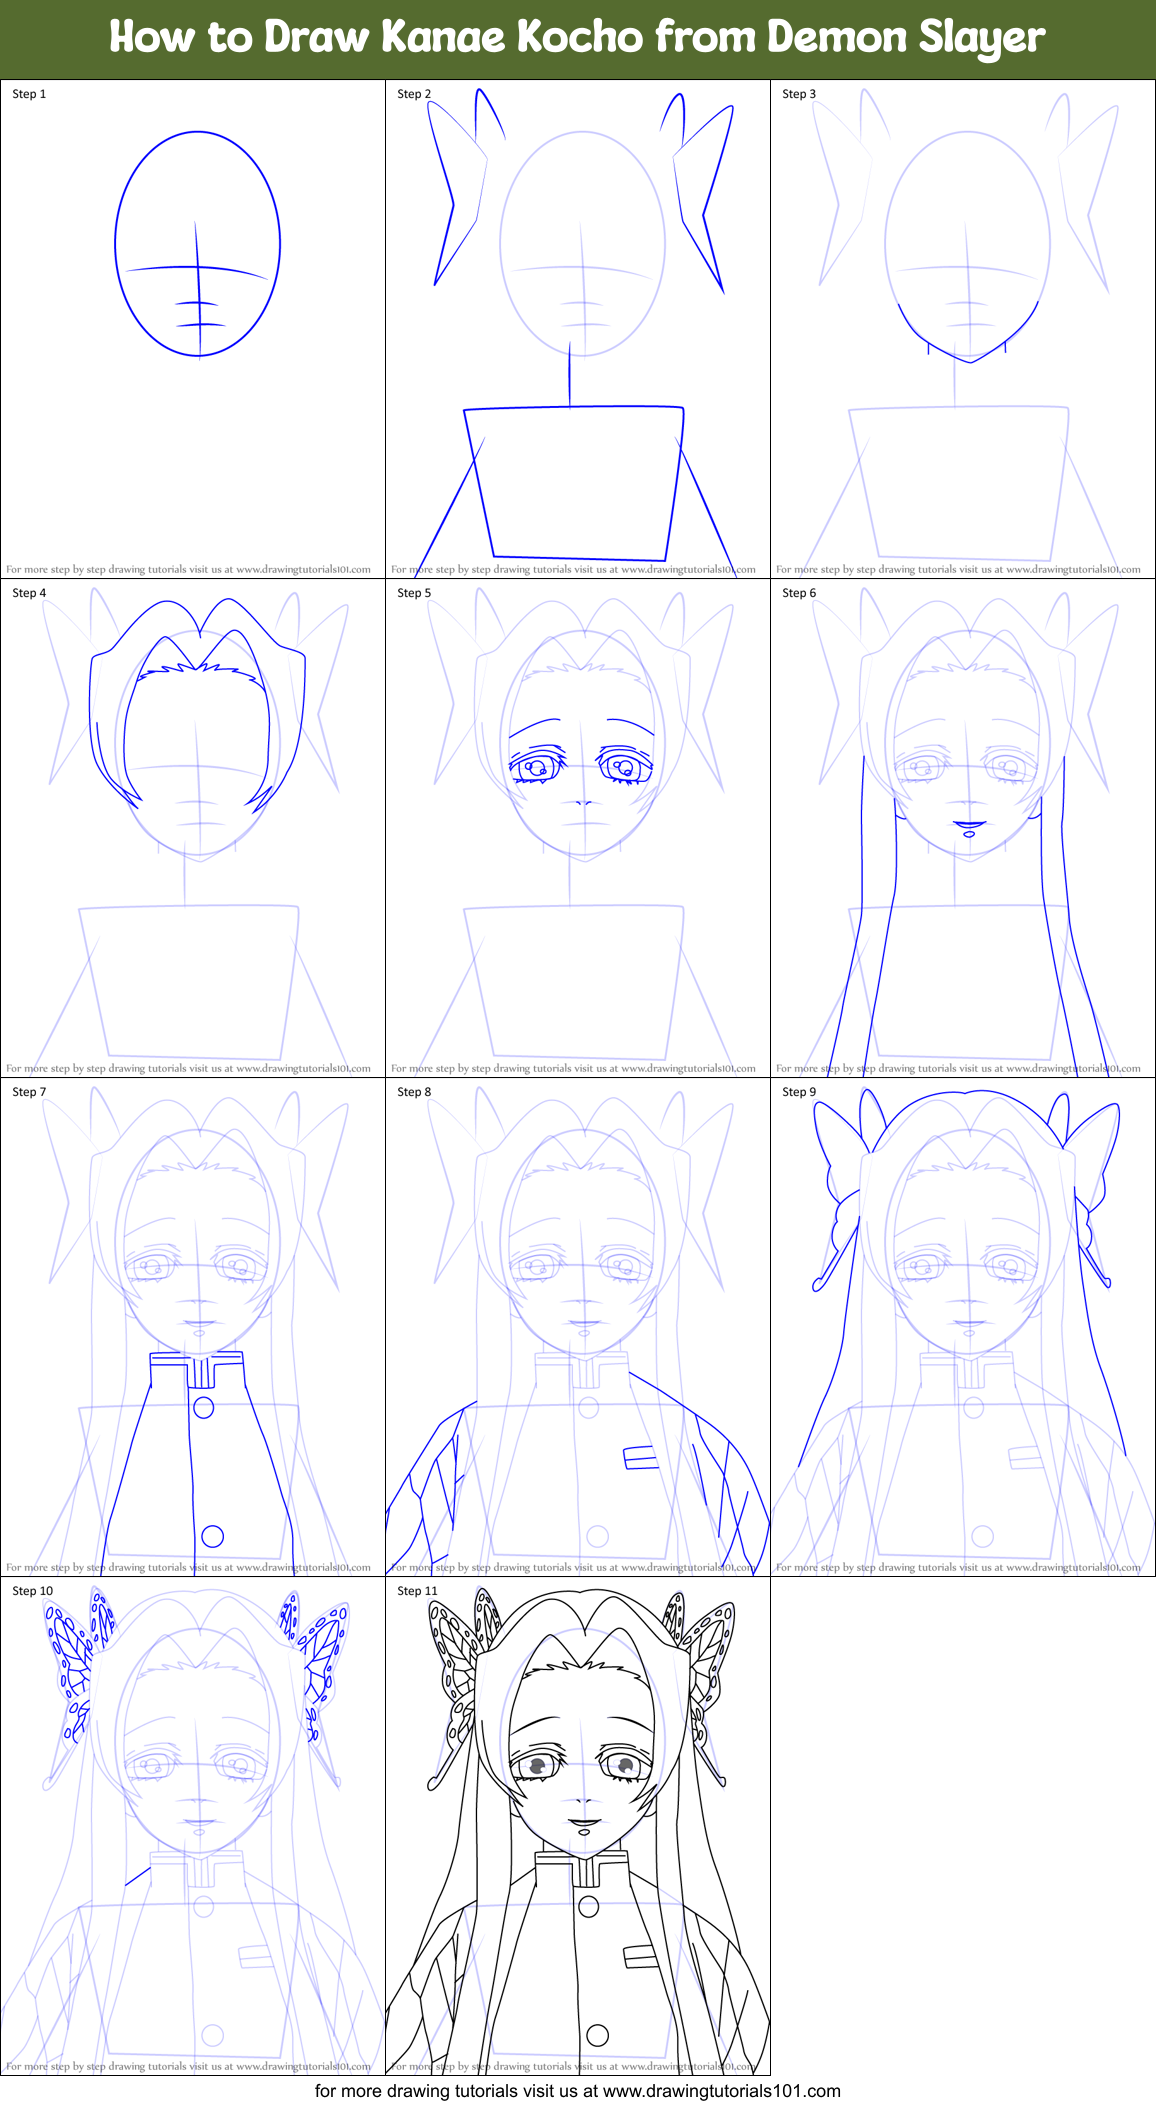 How to Draw Kanae Kocho from Demon Slayer printable step by step